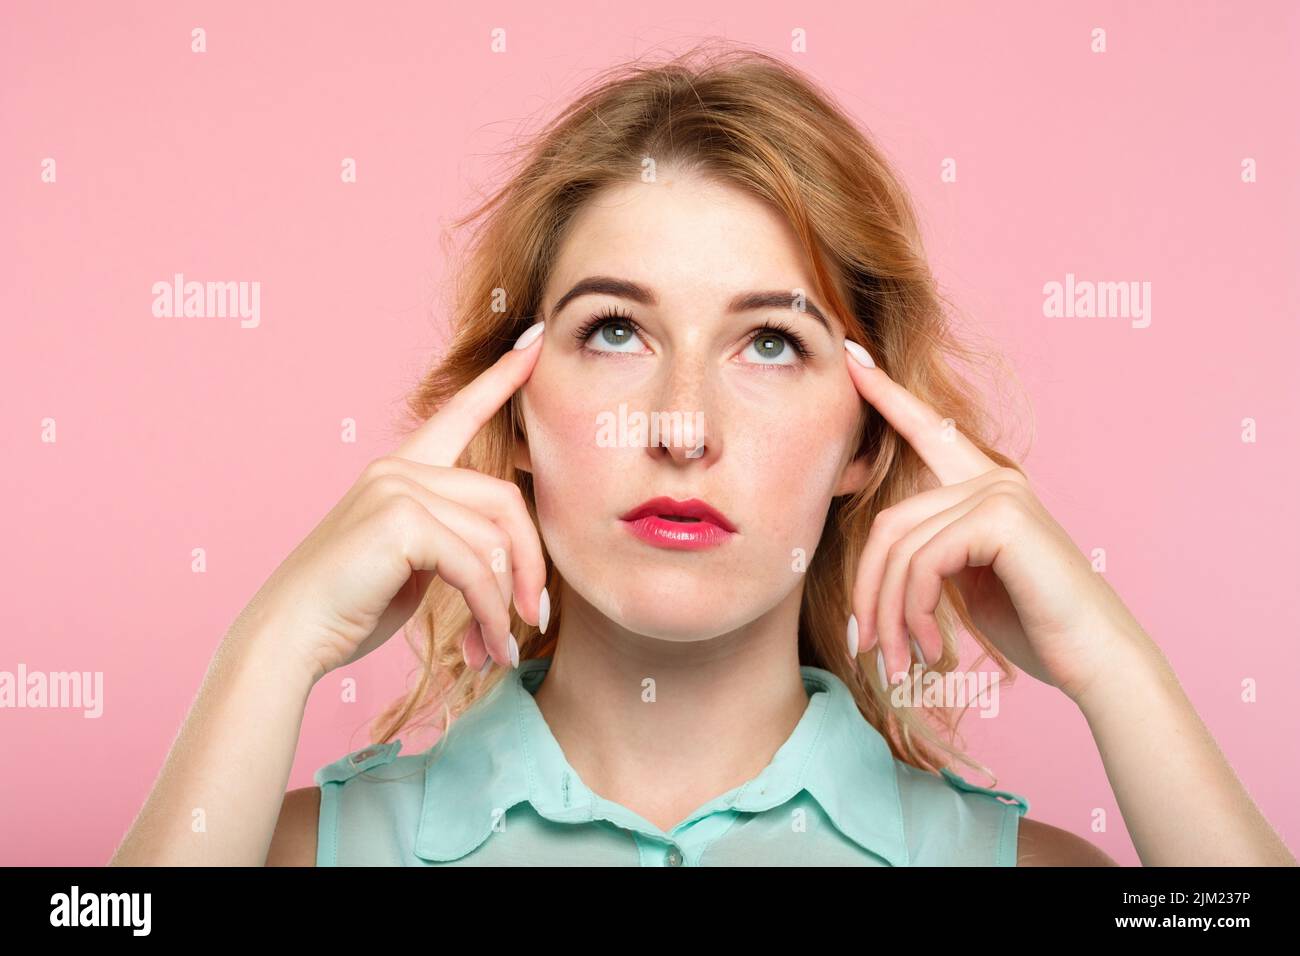 mind games telepathy girl concentrate brain power Stock Photo